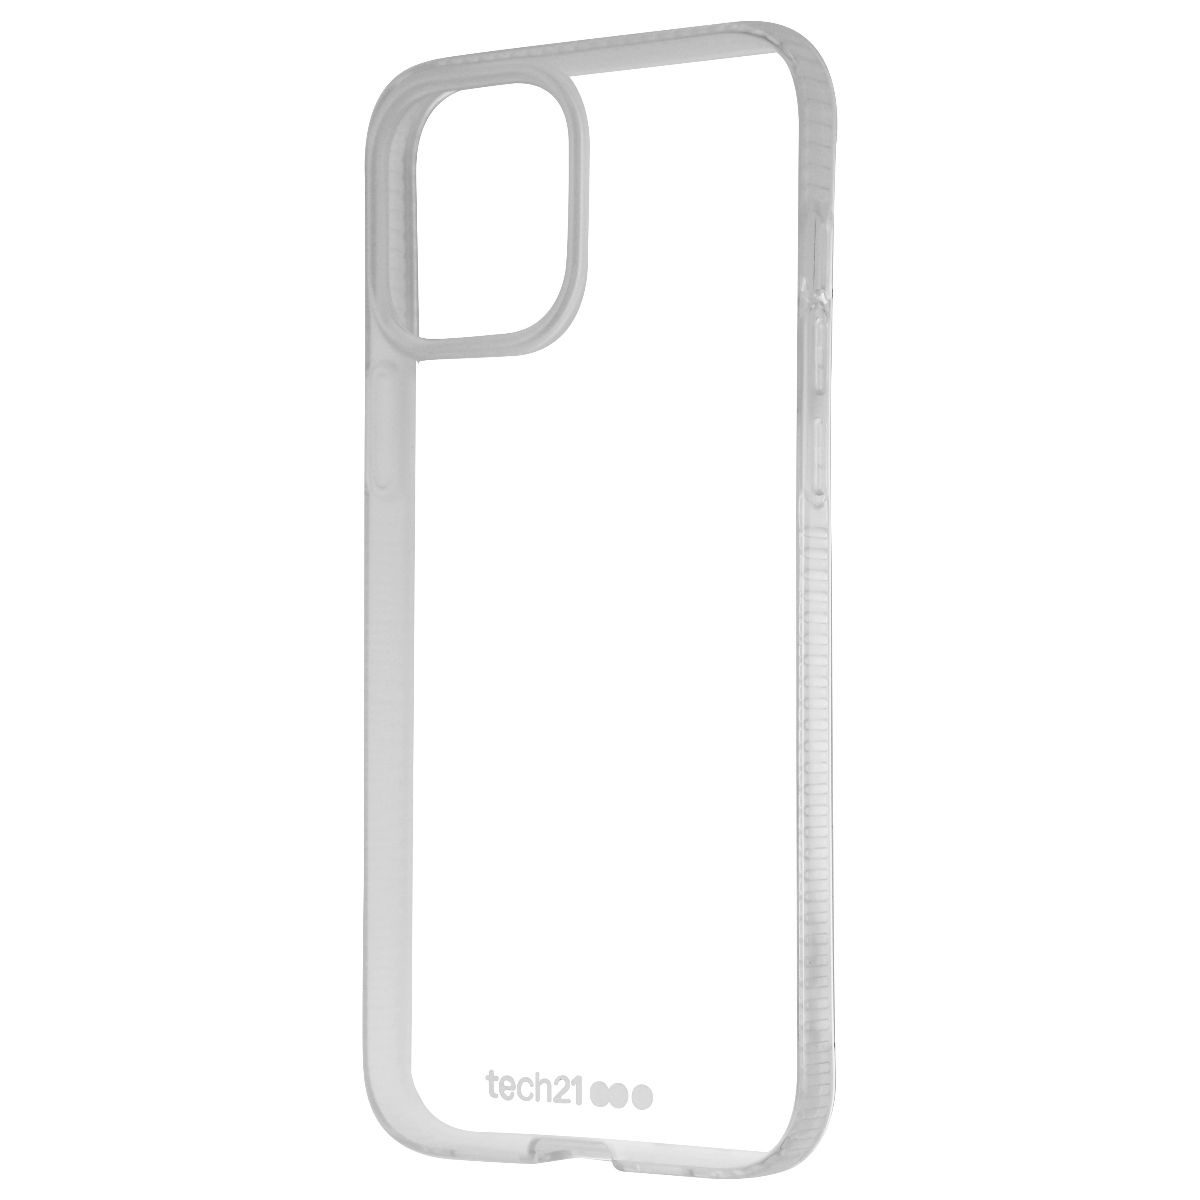 Tech21 Evo Lite Series Case For Apple IPhone 12 Pro Max - Clear